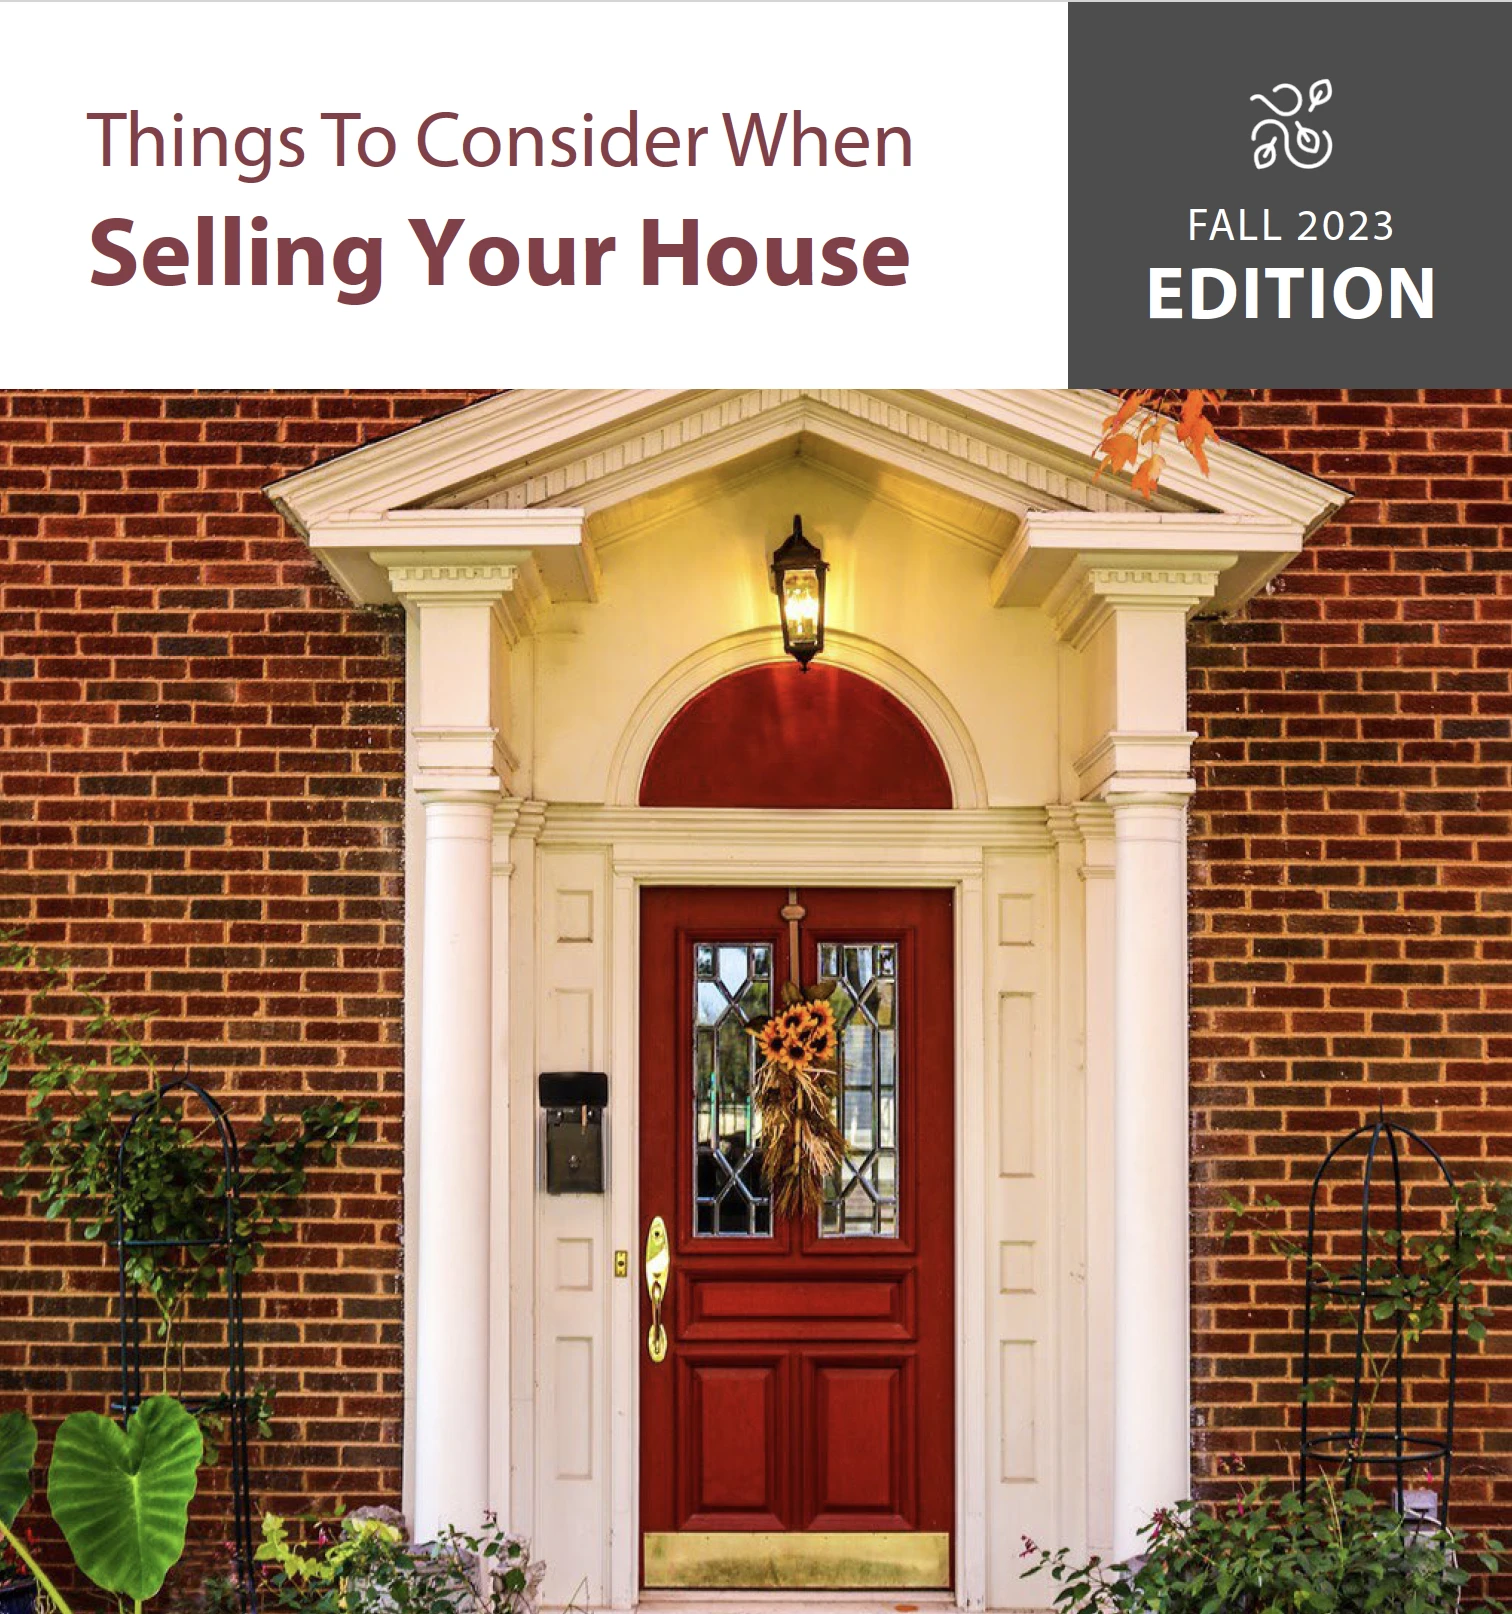 Things to Consider When Selling a Home